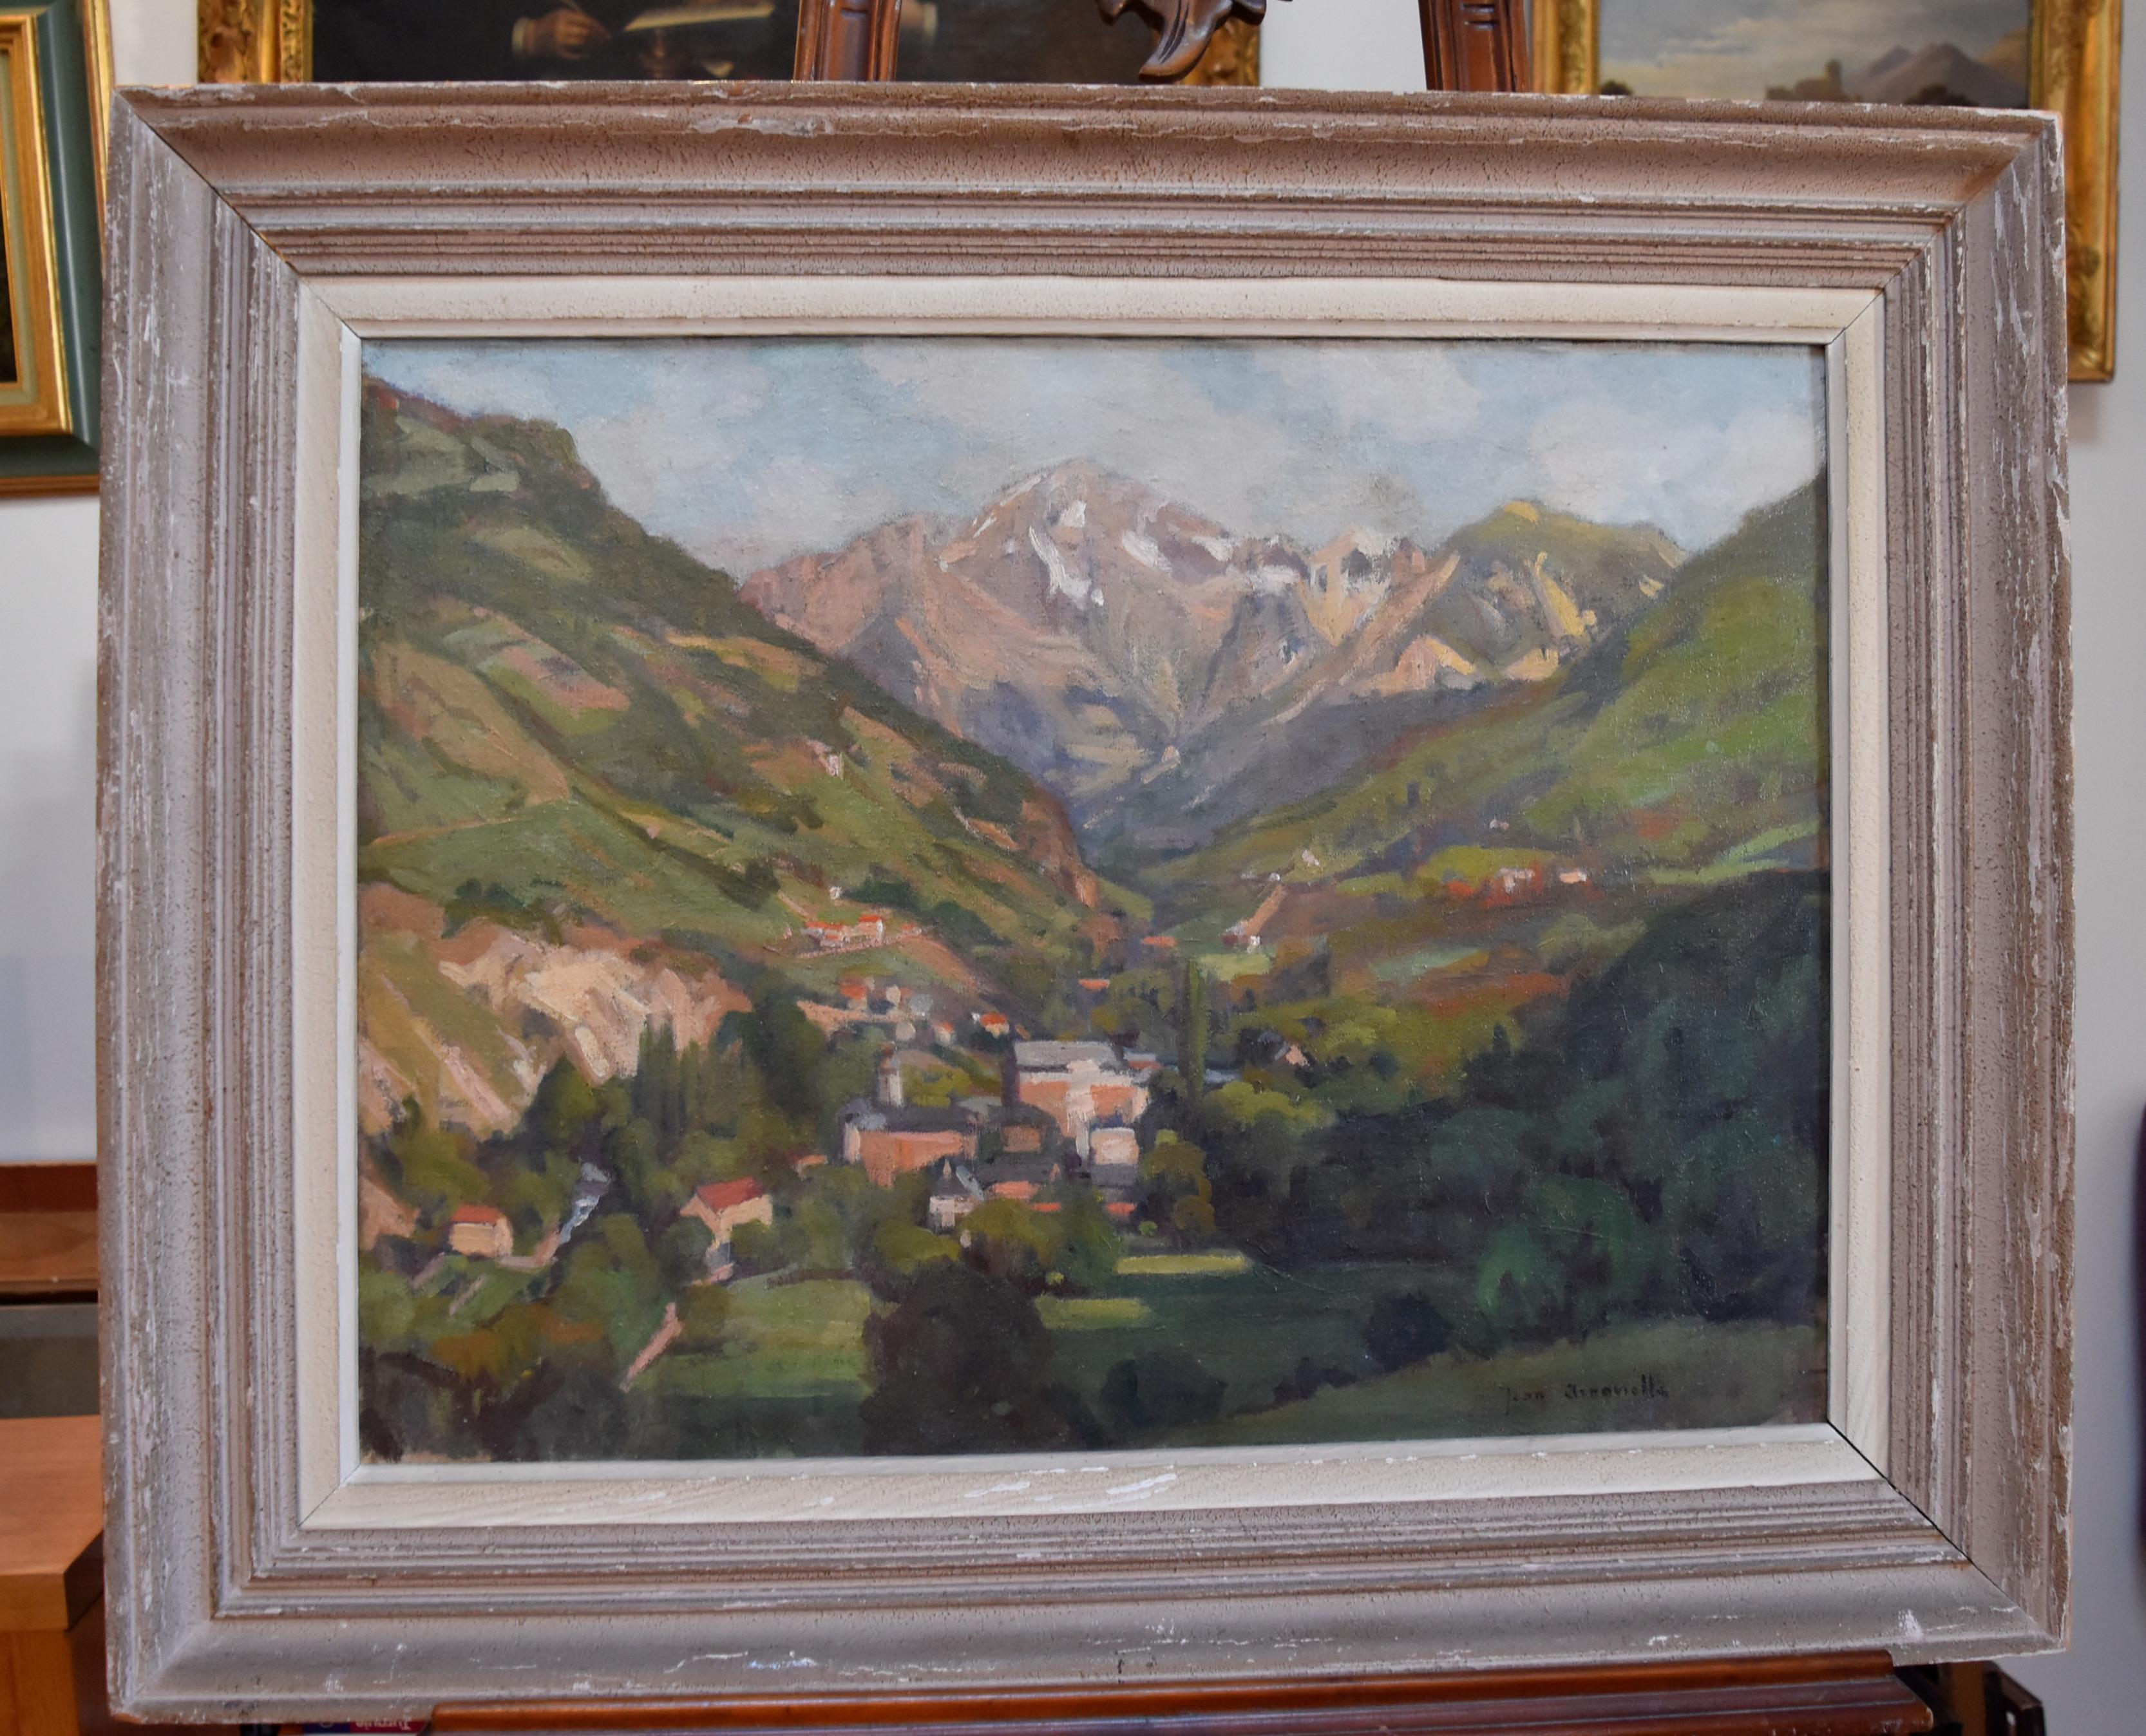 Jean Arnavielle (1881-1961) 
La Vanoise,  A Mountain Landscape 
Signed lower right 
Oil on canvas, 46 x 61 cm 
in its original frame 63 x 78 cm

Jean Arnavielle was a french painter, born in 1881. 
He's mosty known for his landscapes which are